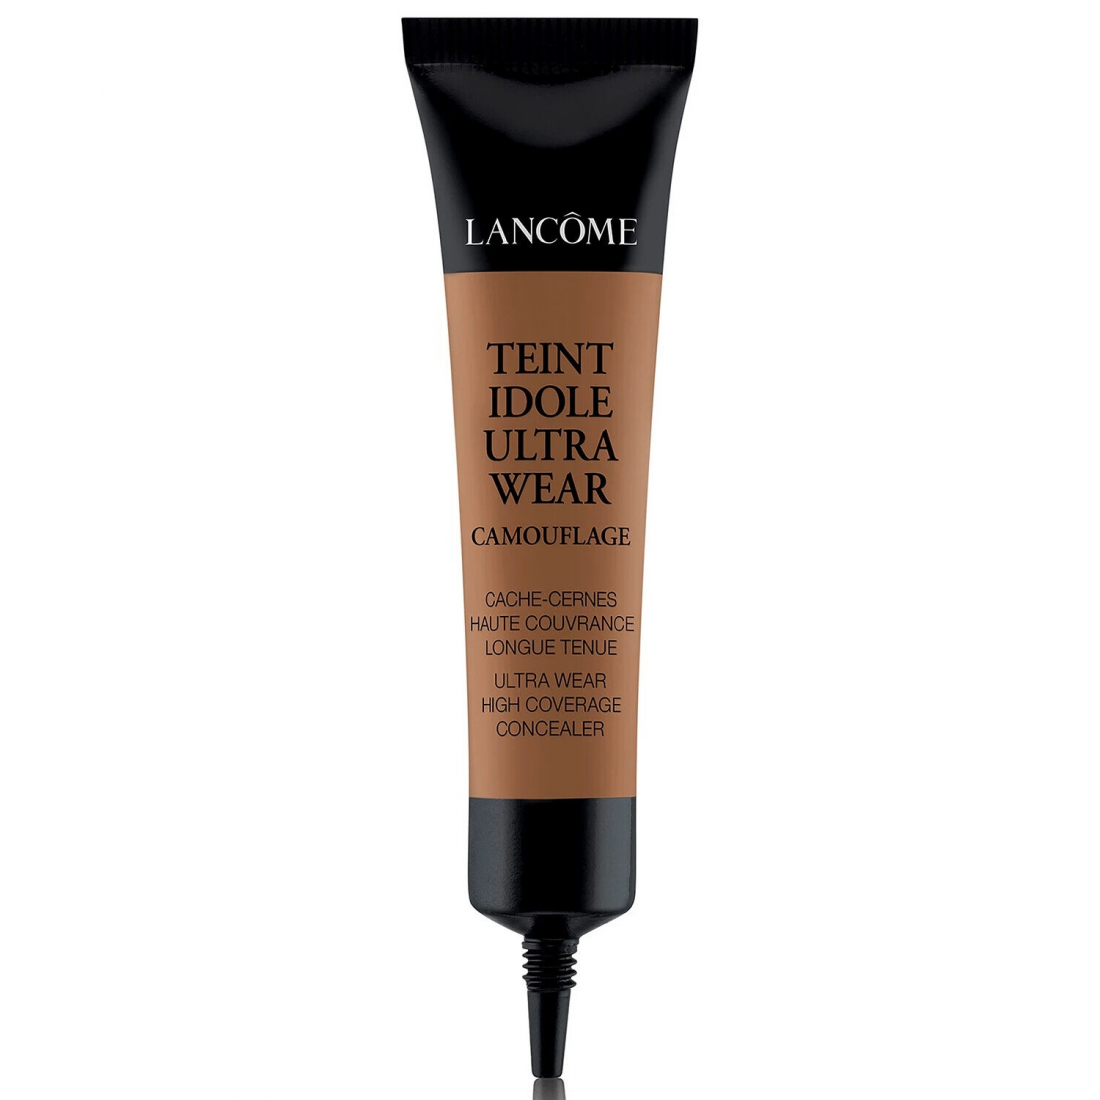 'Teint Idôle Ultra Wear Camouflage' Concealer - 495 Suede W 12 ml